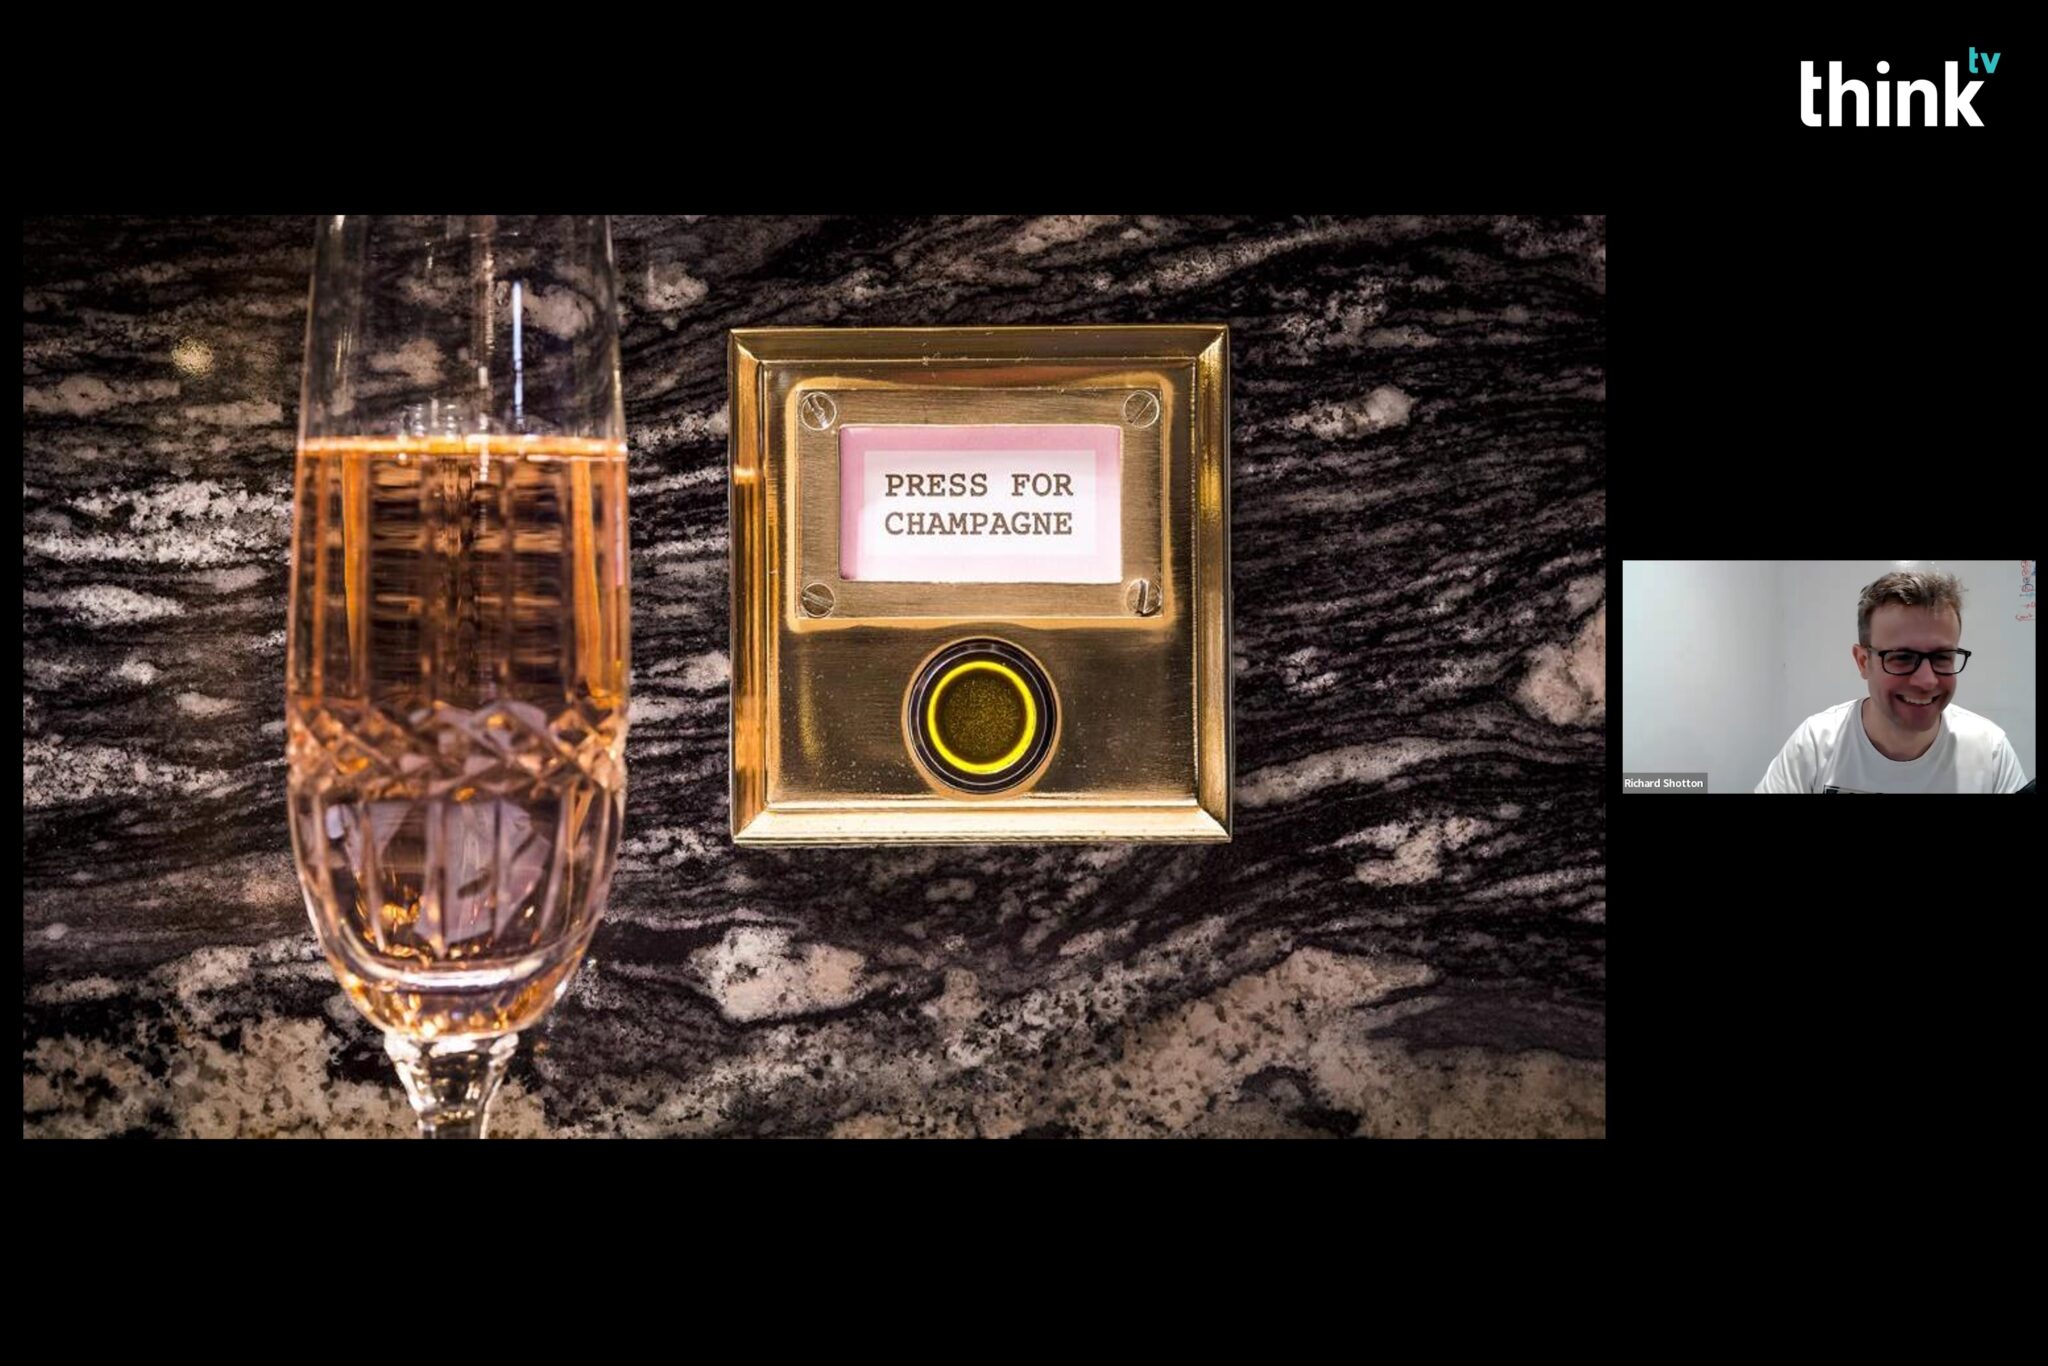 illusion-of-choice-post-event-header-champagne-750x500-1-2048x1366